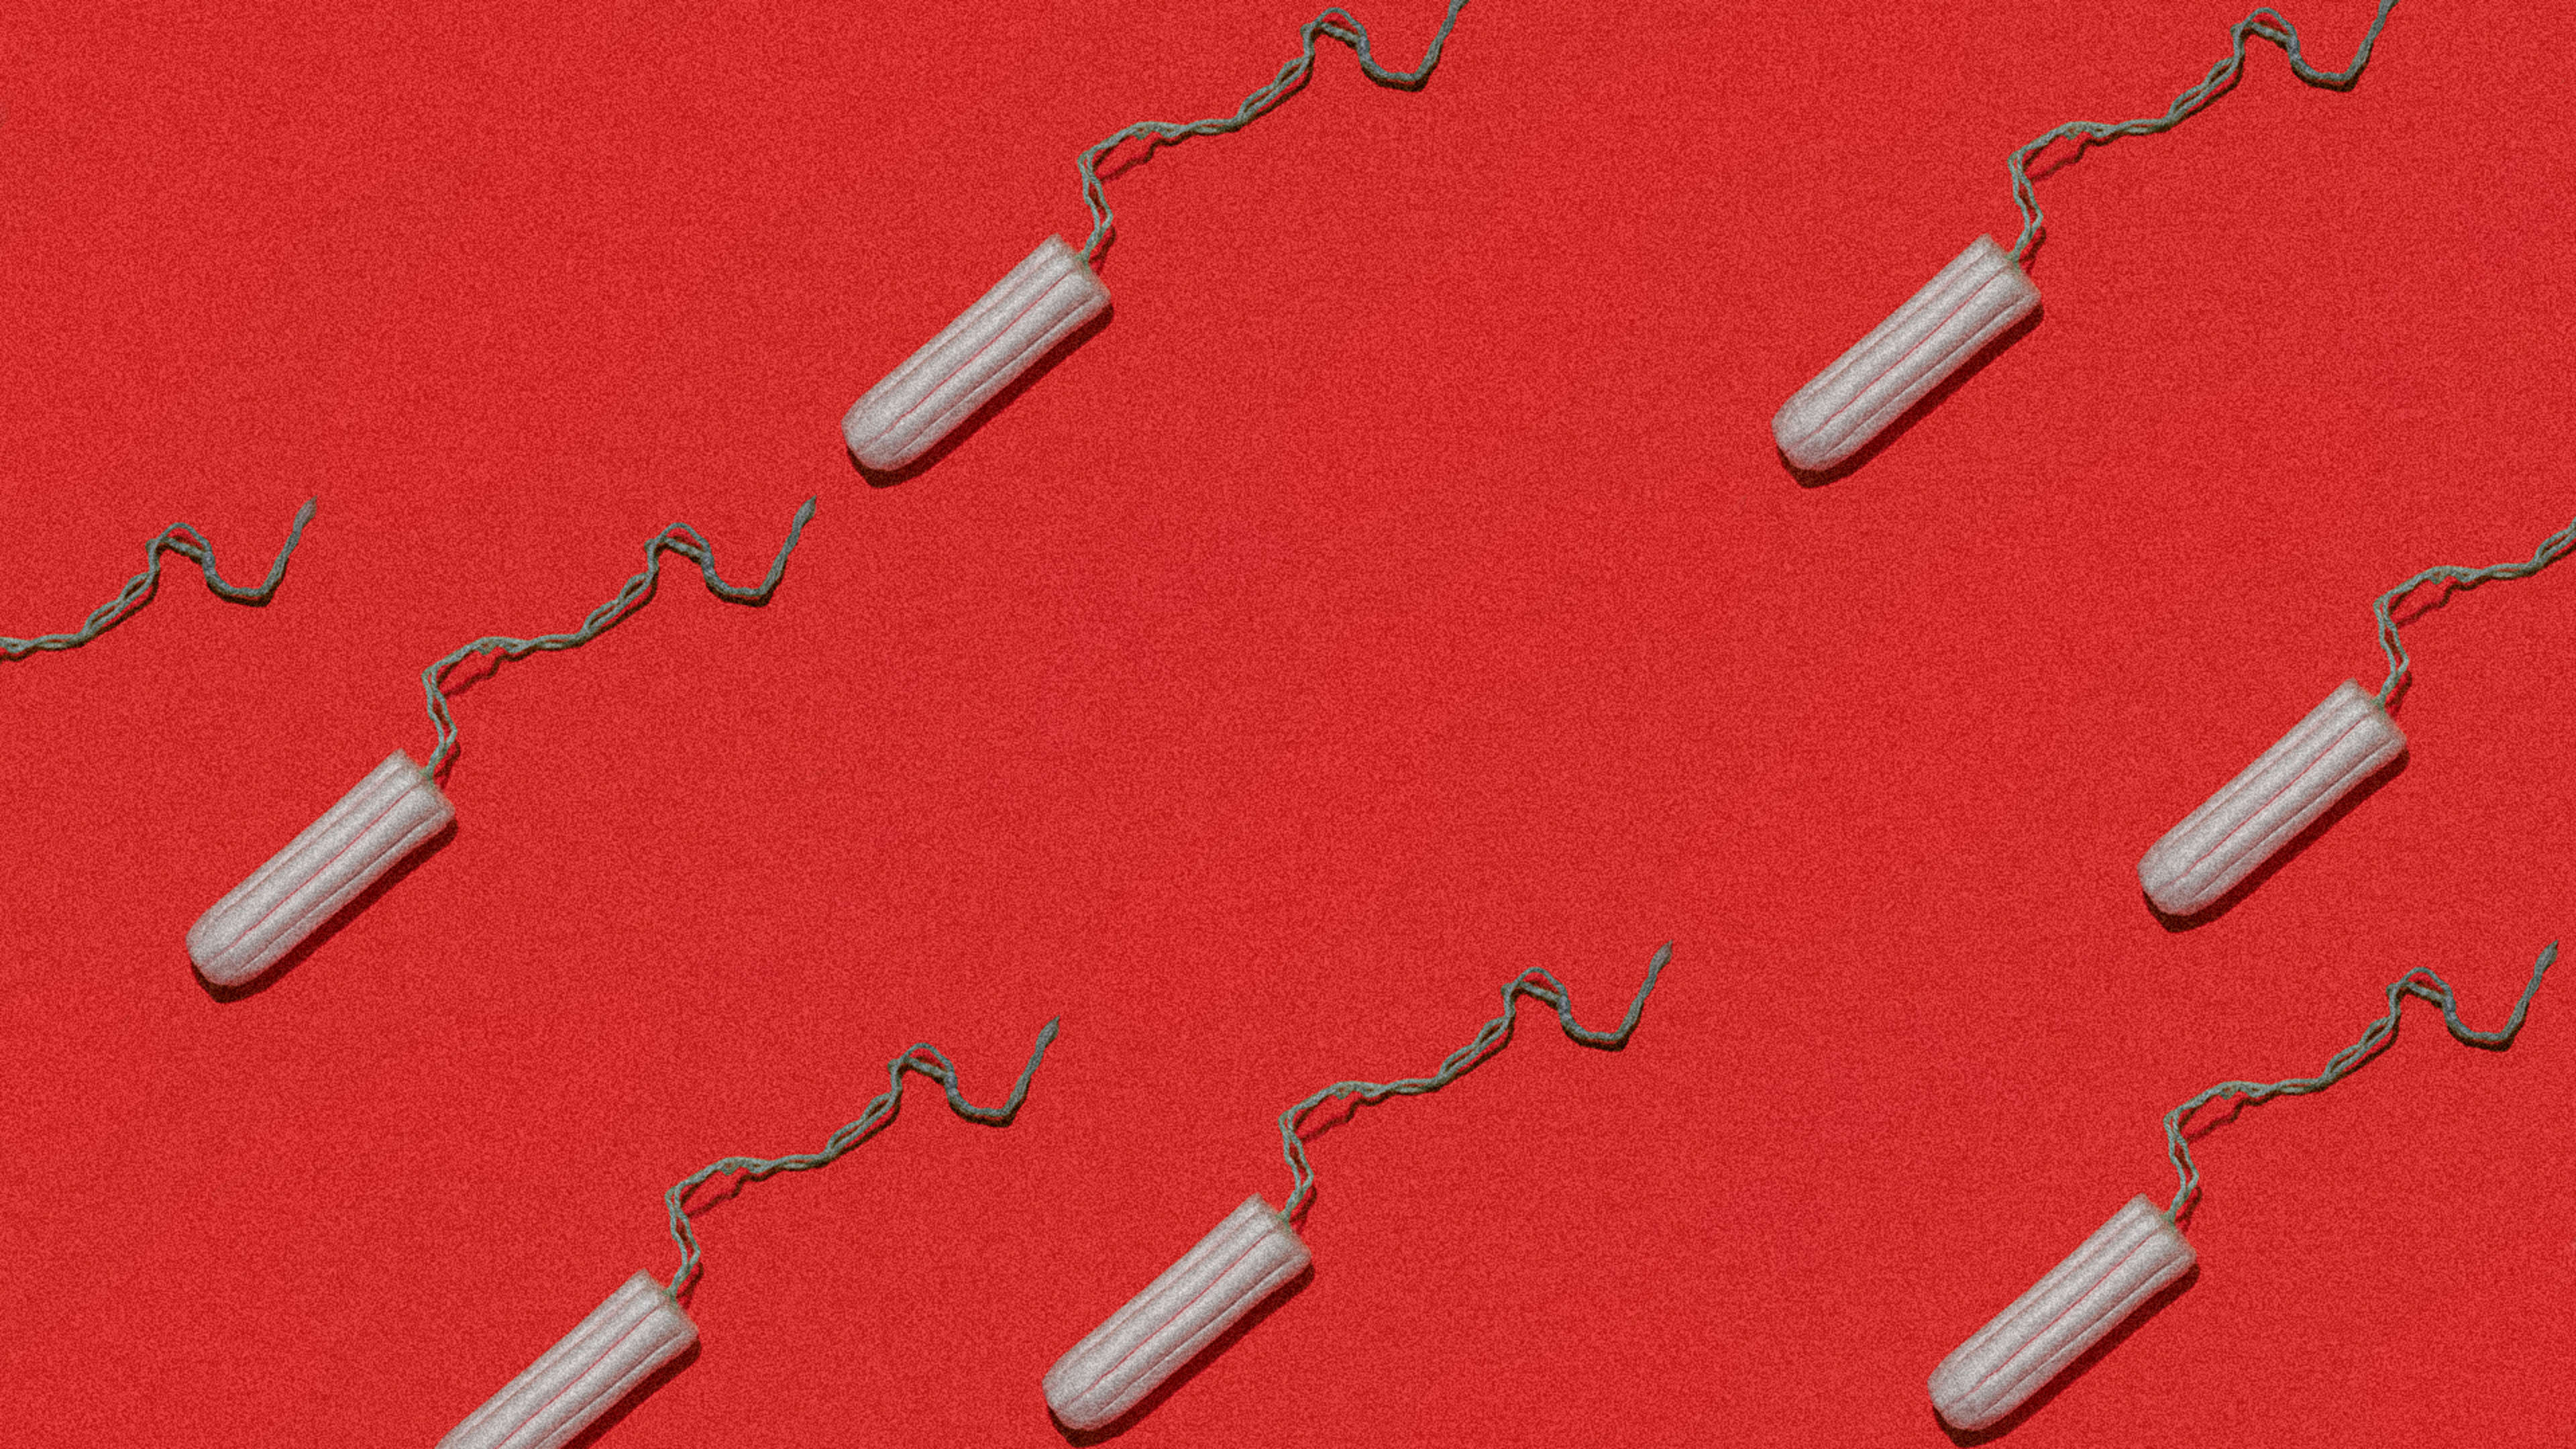 Tampons are the latest vital product that are suddenly hard to find